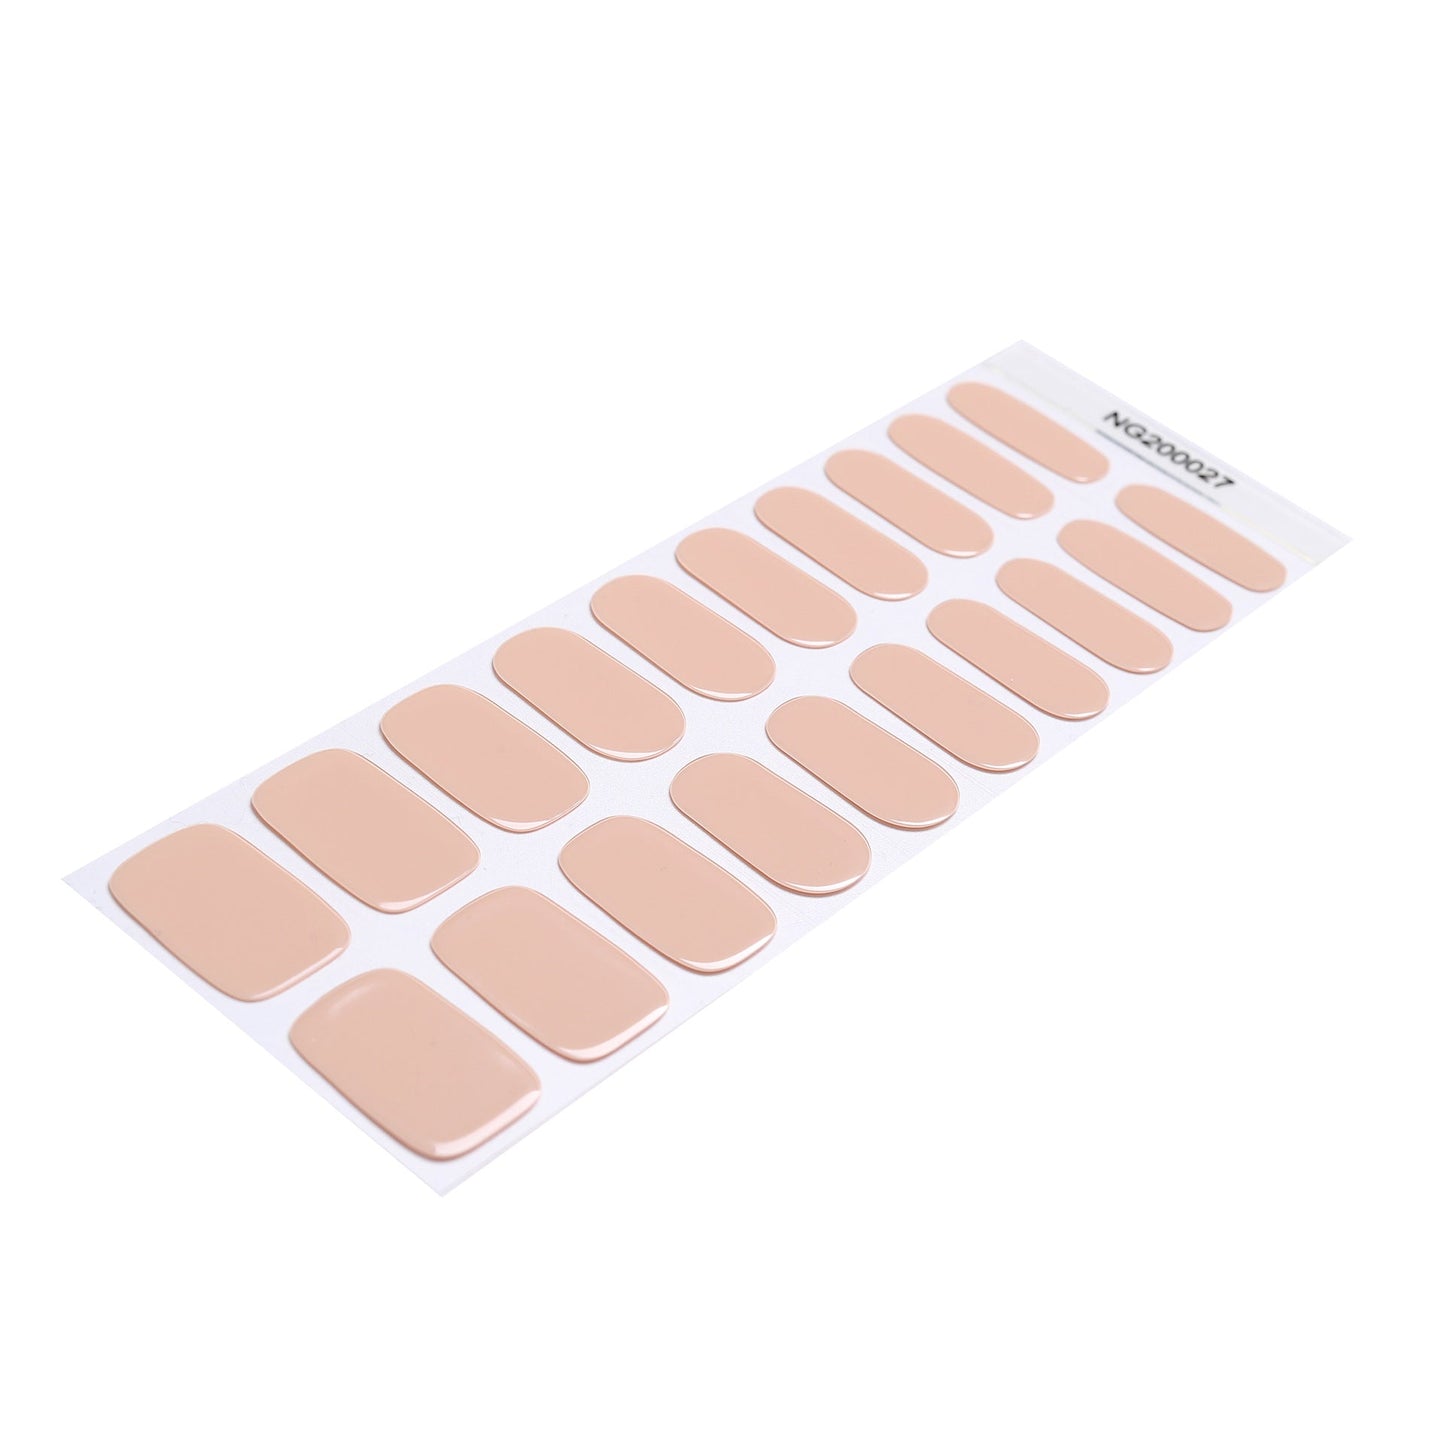 Miss One Semi-Cured Gel Nail Wraps Classic Nude - Miss One